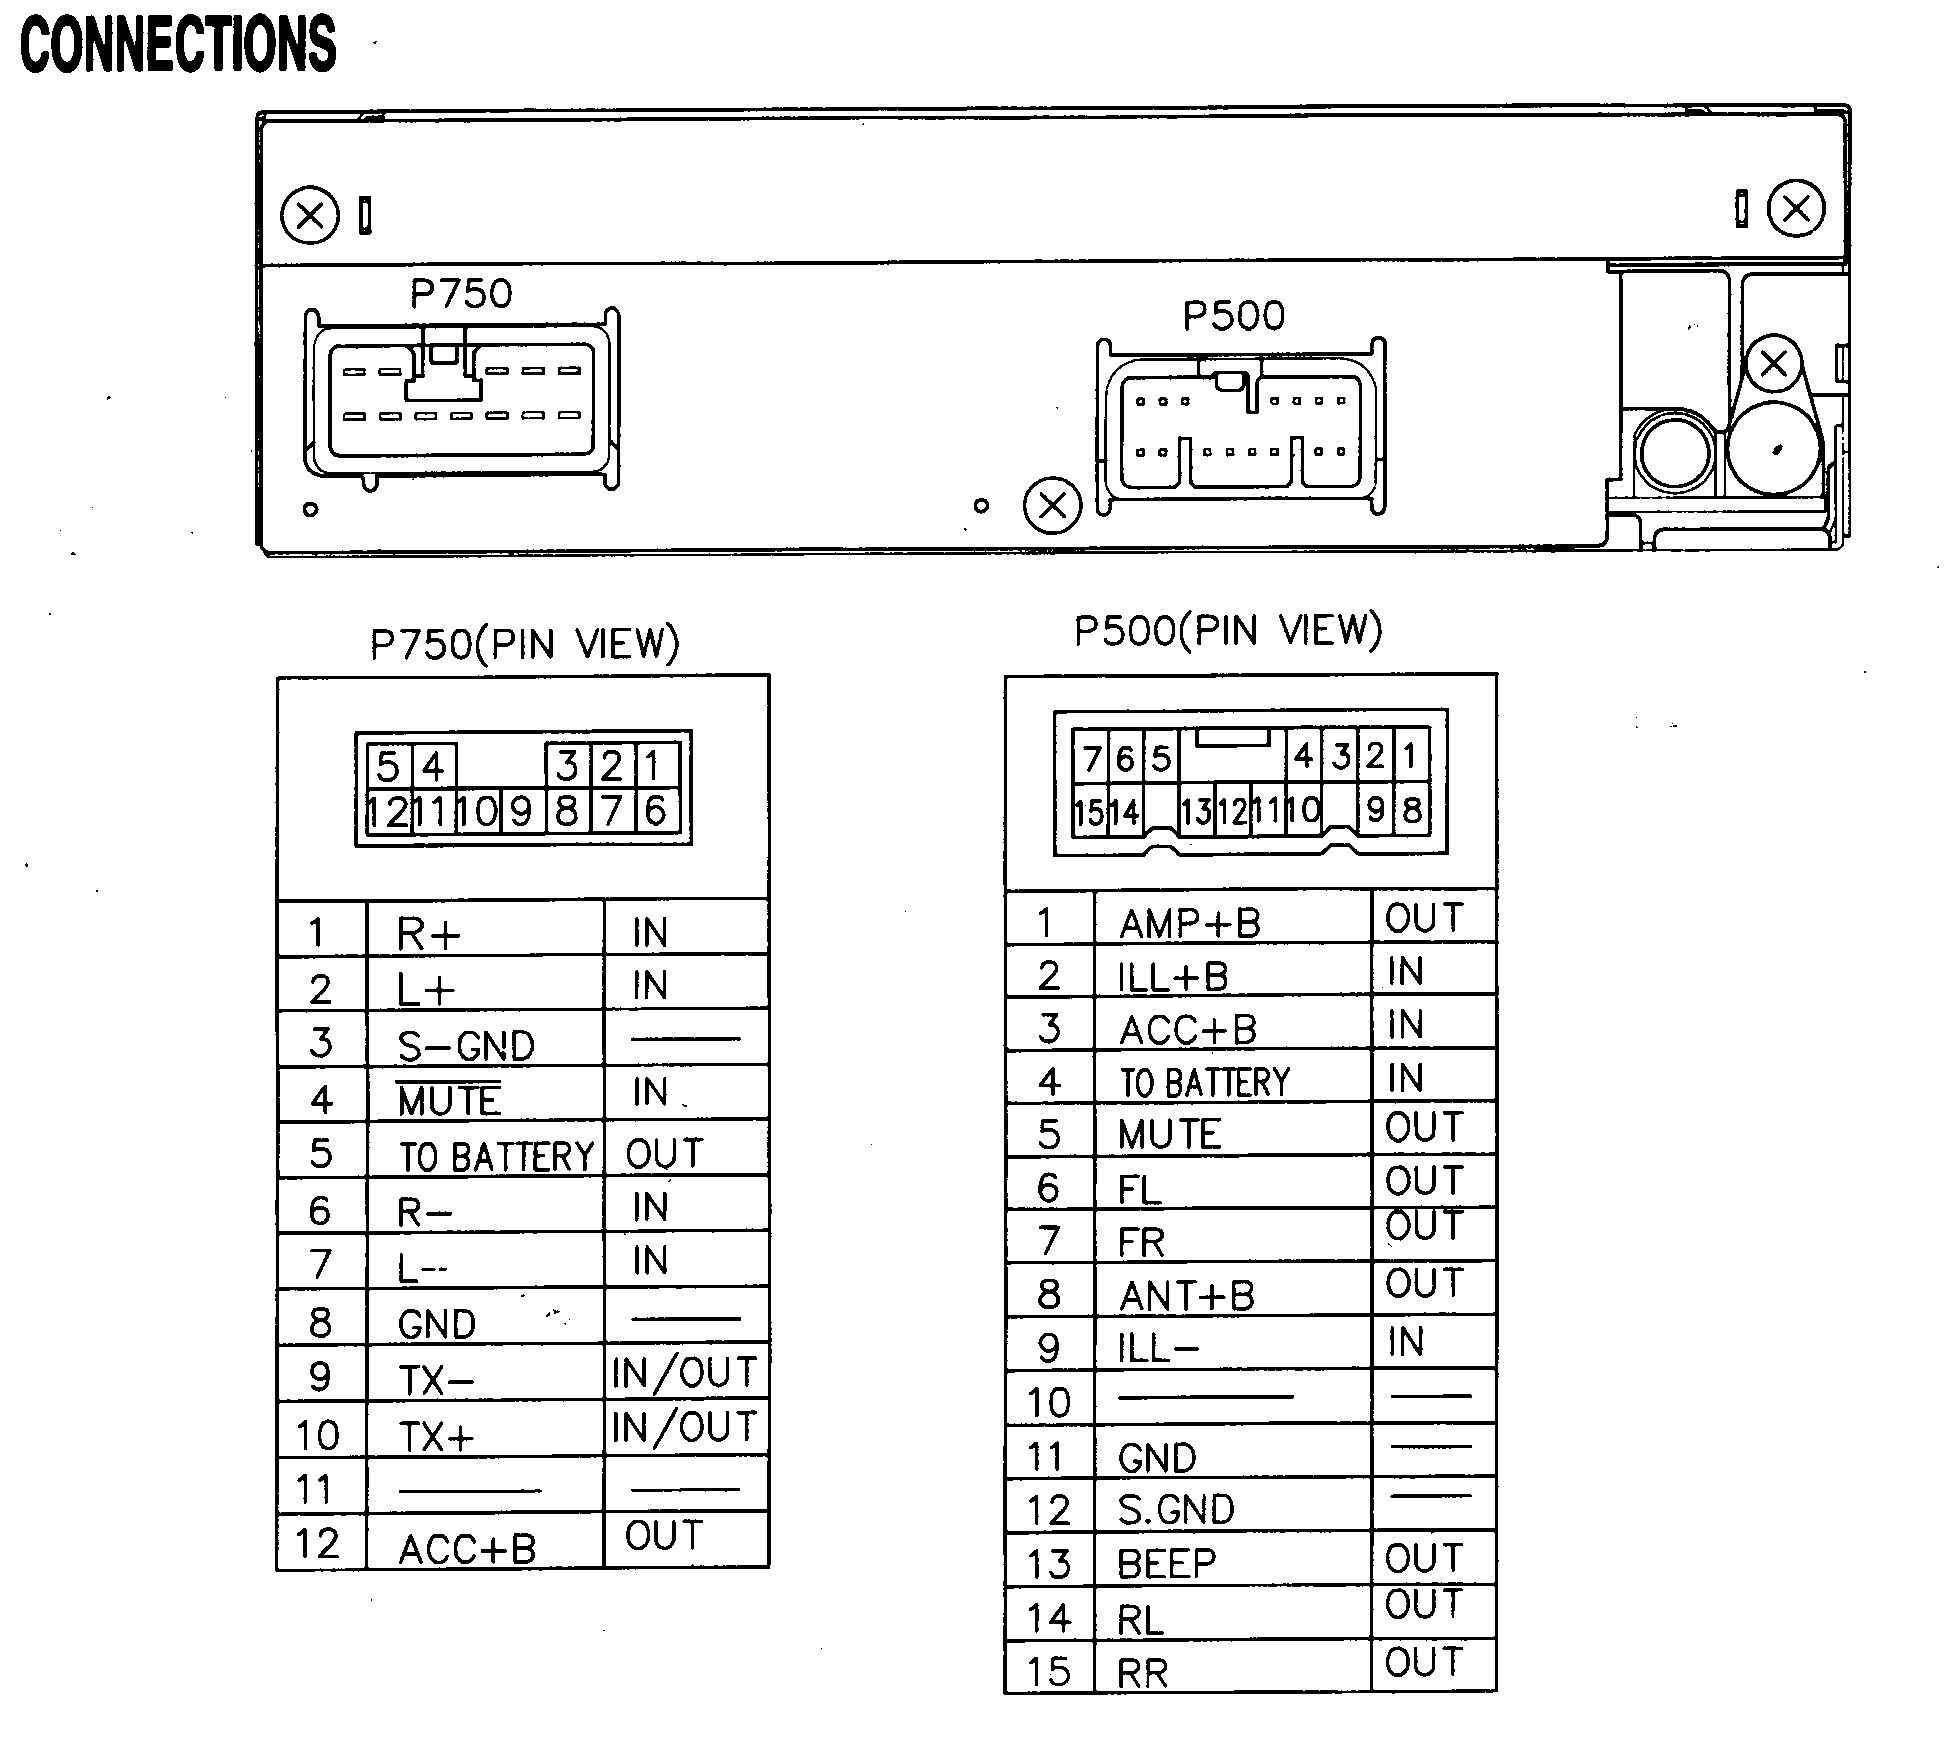 1998 toyota Camry Wiring Diagram Connector 2000 Connectors Wiring Diagram Get Free Image About Wiring Of 1998 toyota Camry Wiring Diagram